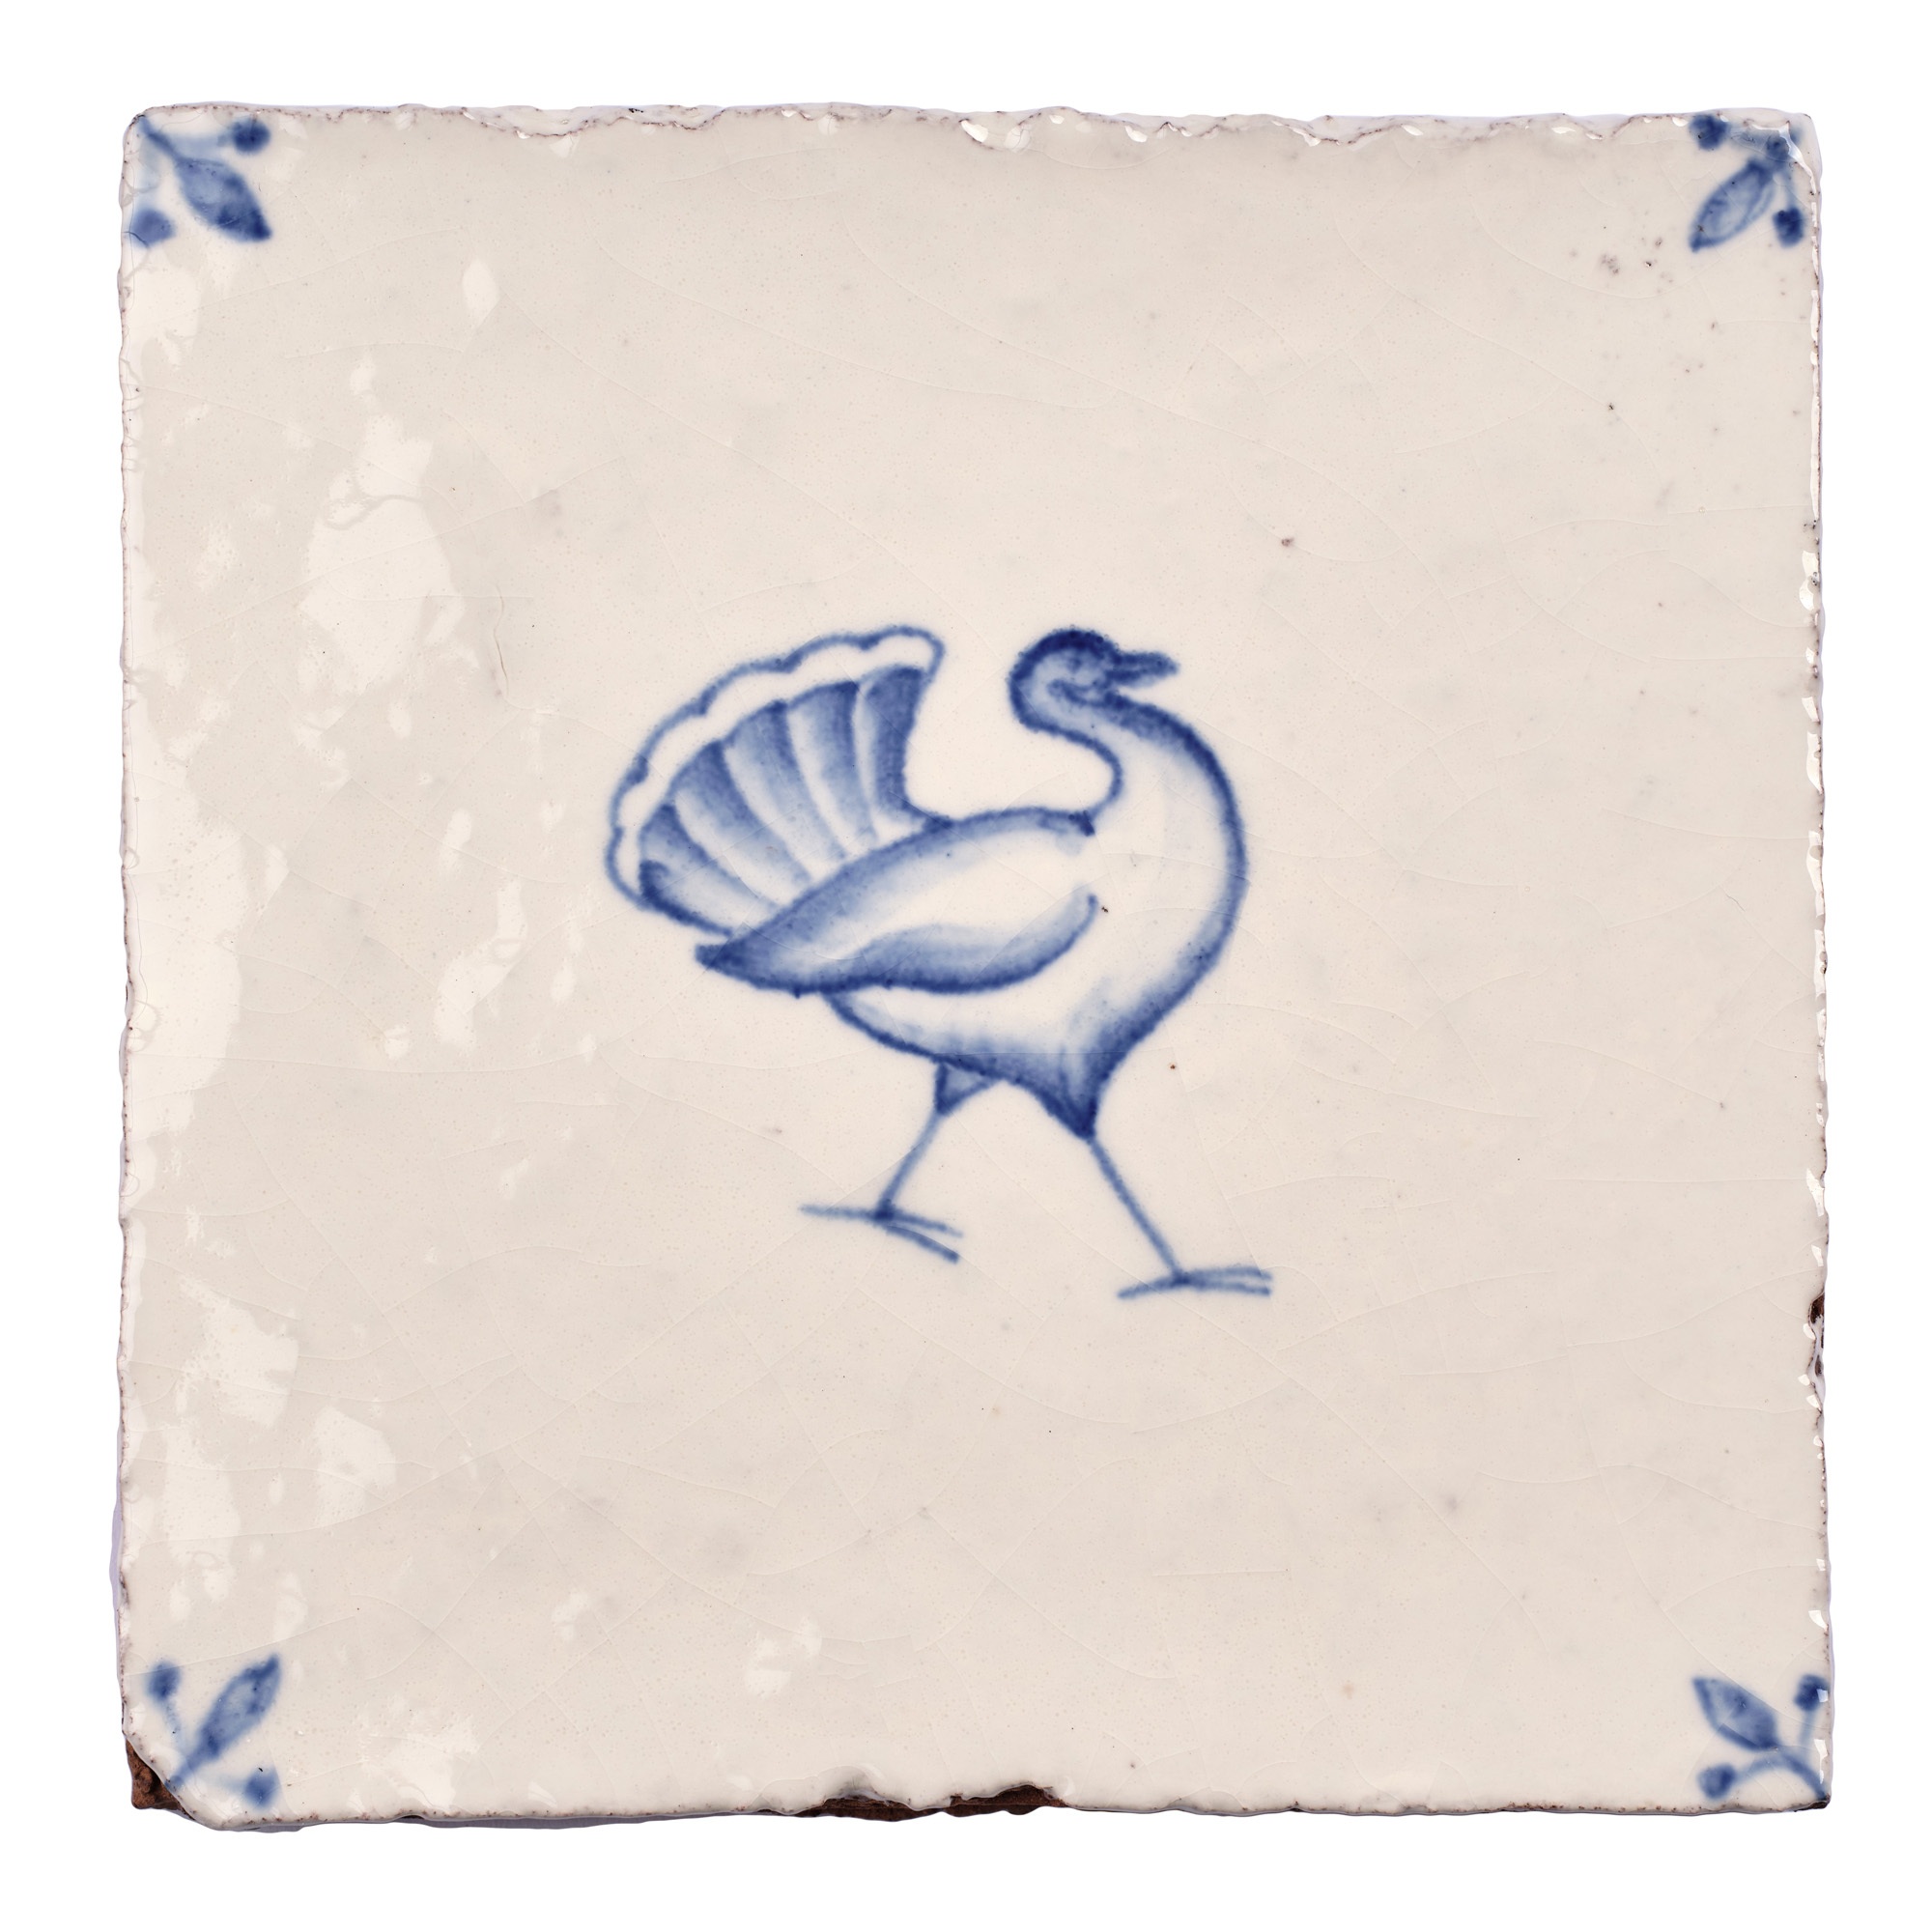 Wilding Bustard with Corner Motif Square, product variant image